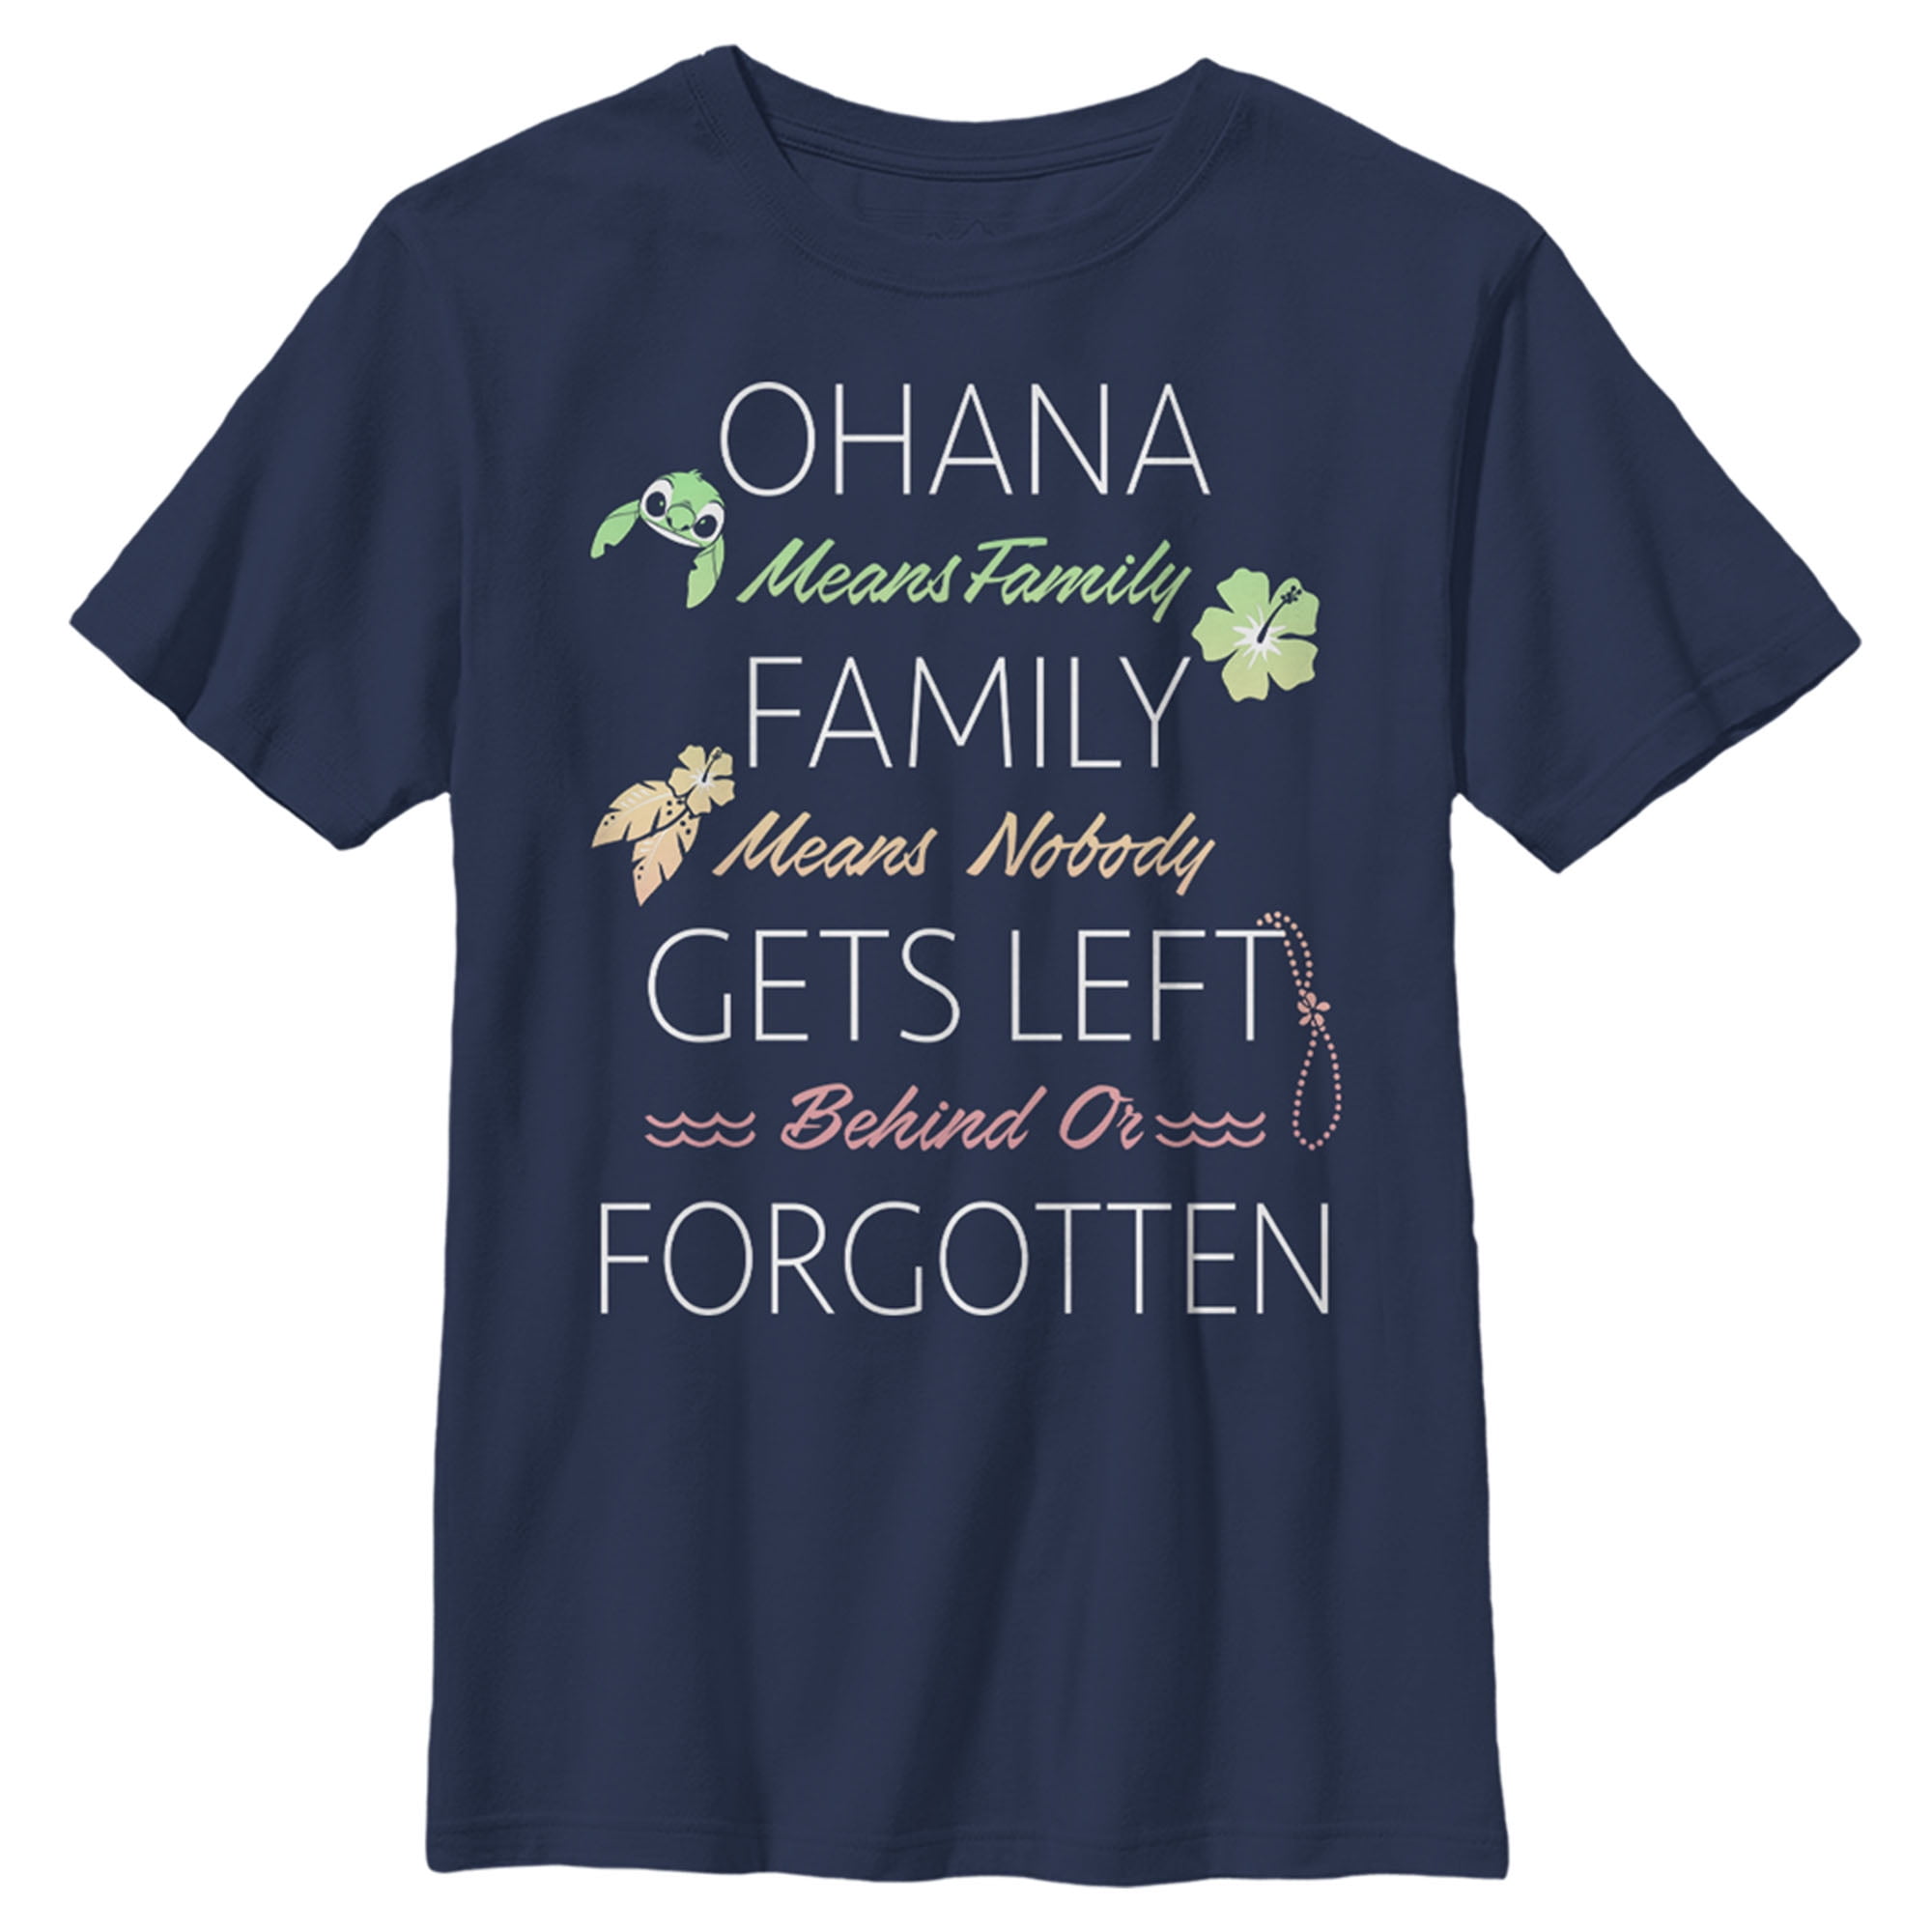 Boy's Lilo & Stitch Stylized Ohana means Family Quote Graphic Tee Navy Blue  X Small